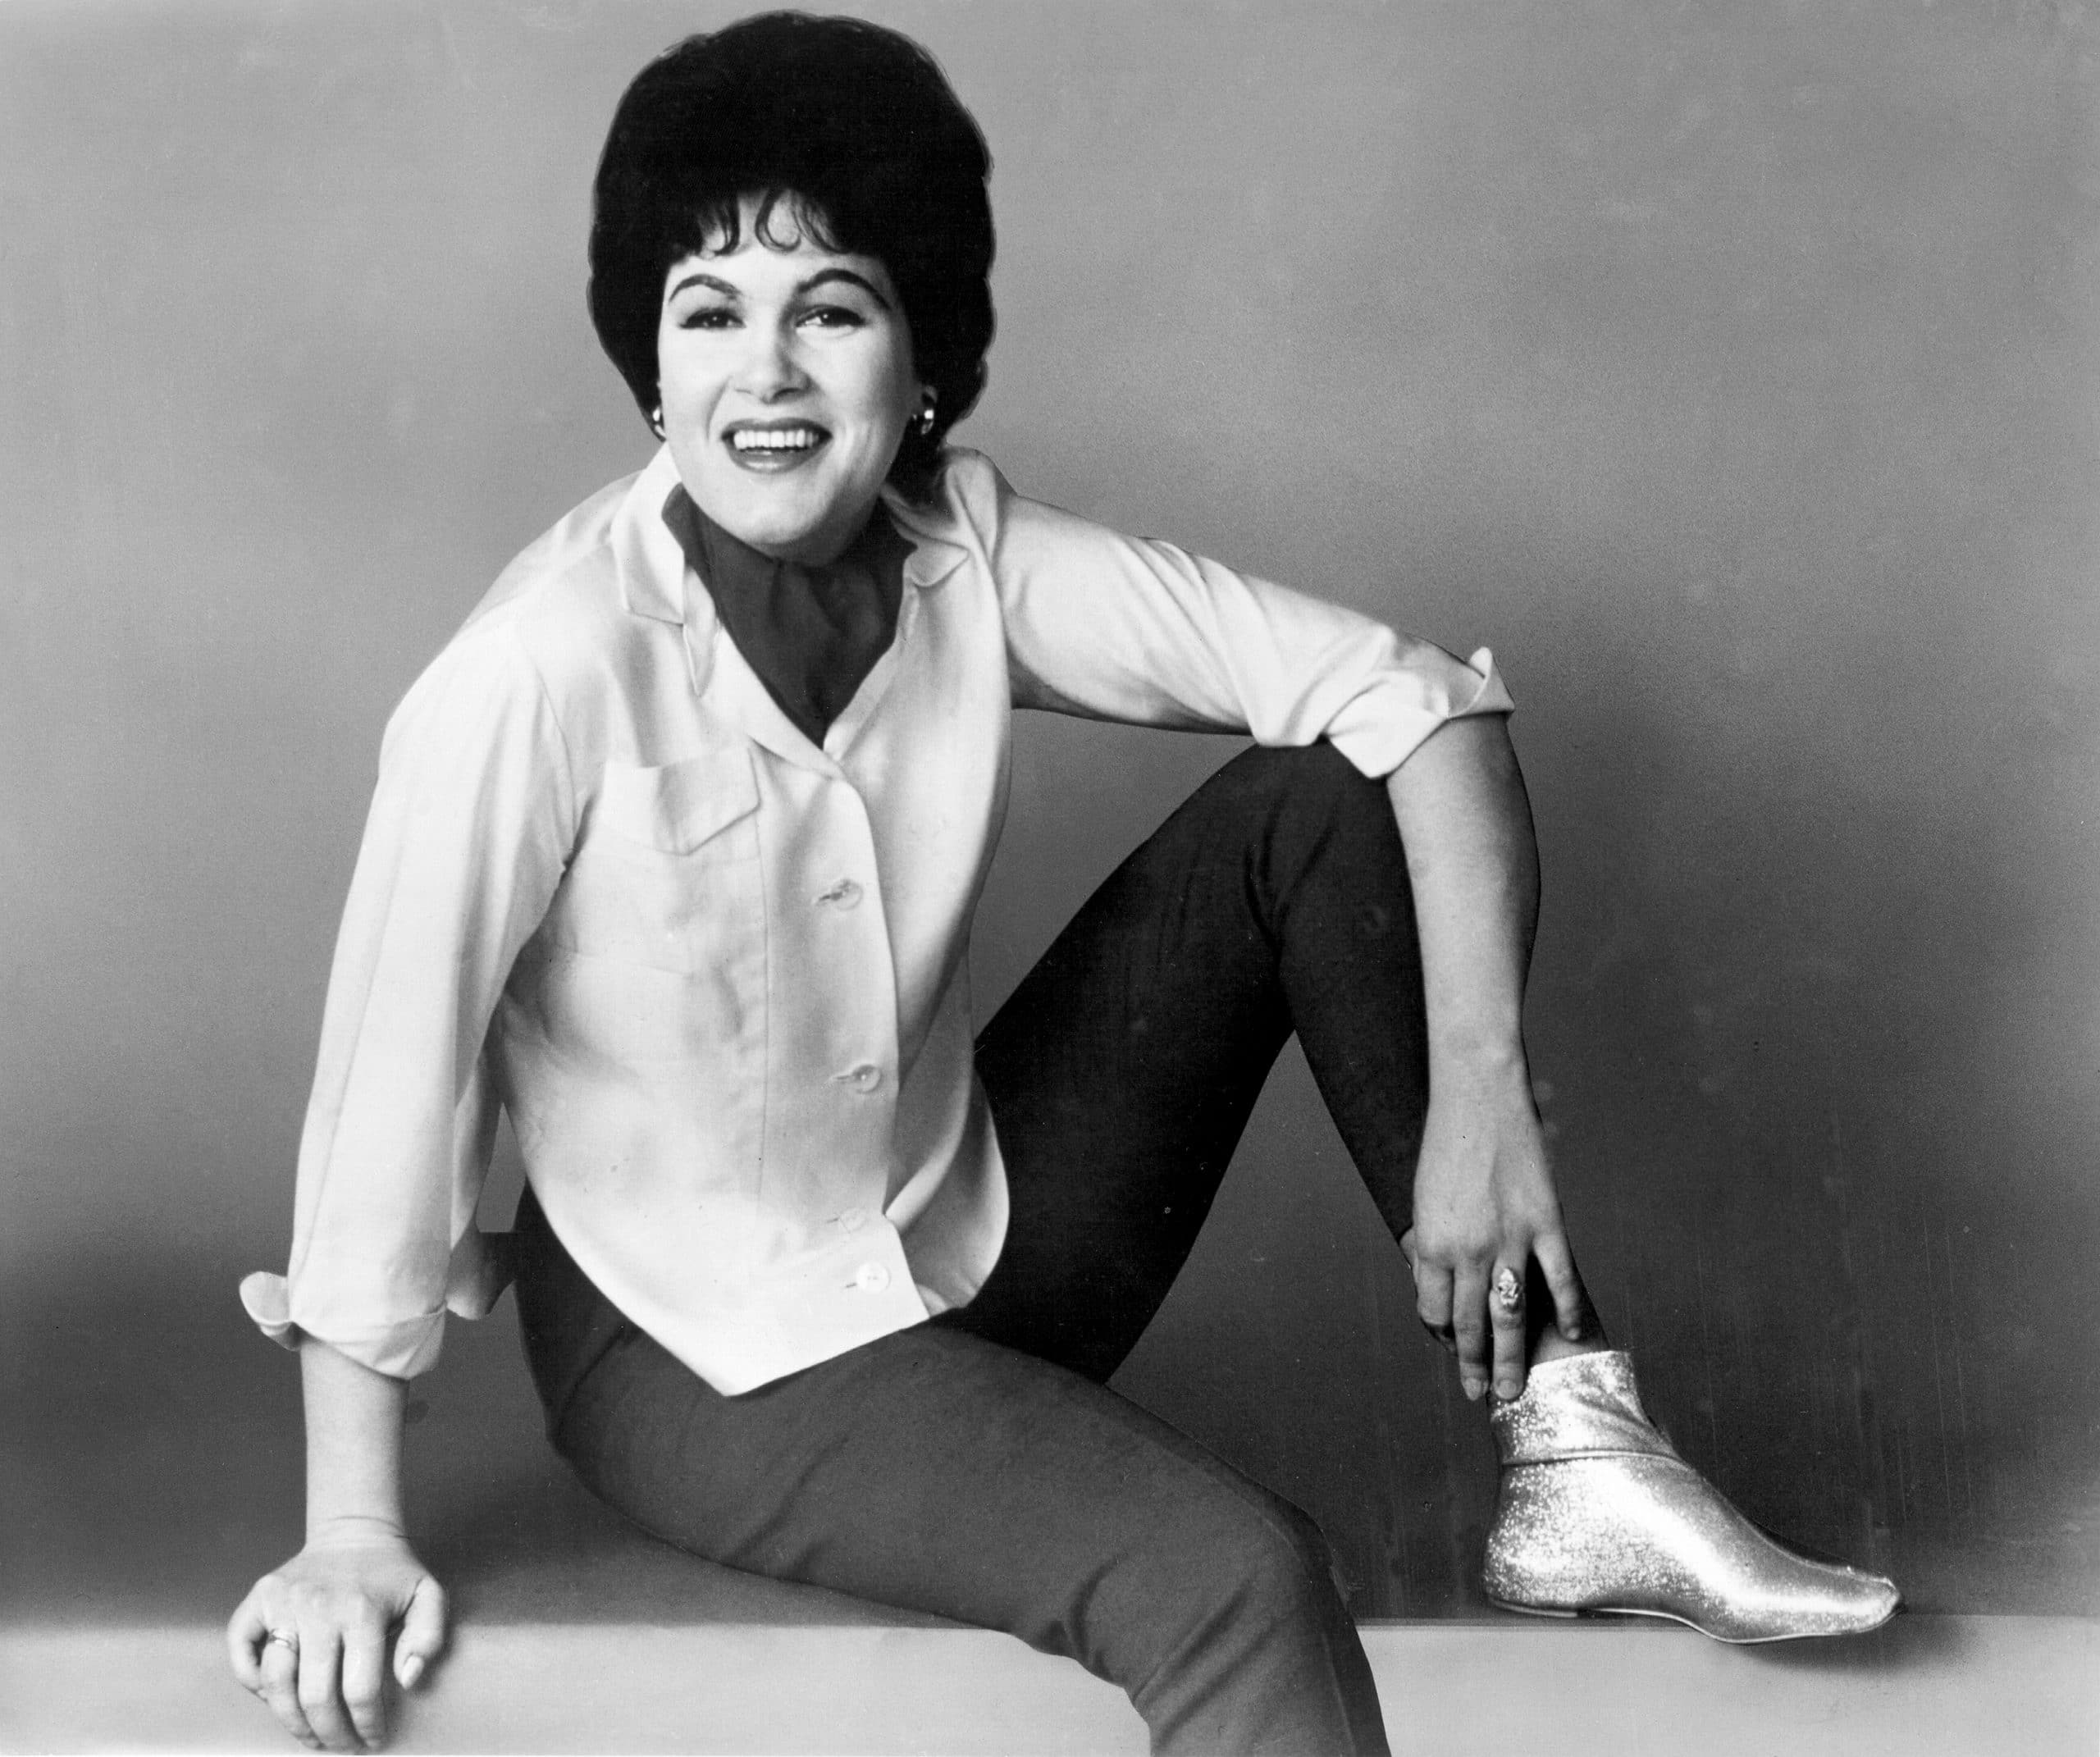 A portrait of Patsy Cline - she showcased her yodeling skills while singing "San Antonio Rose"